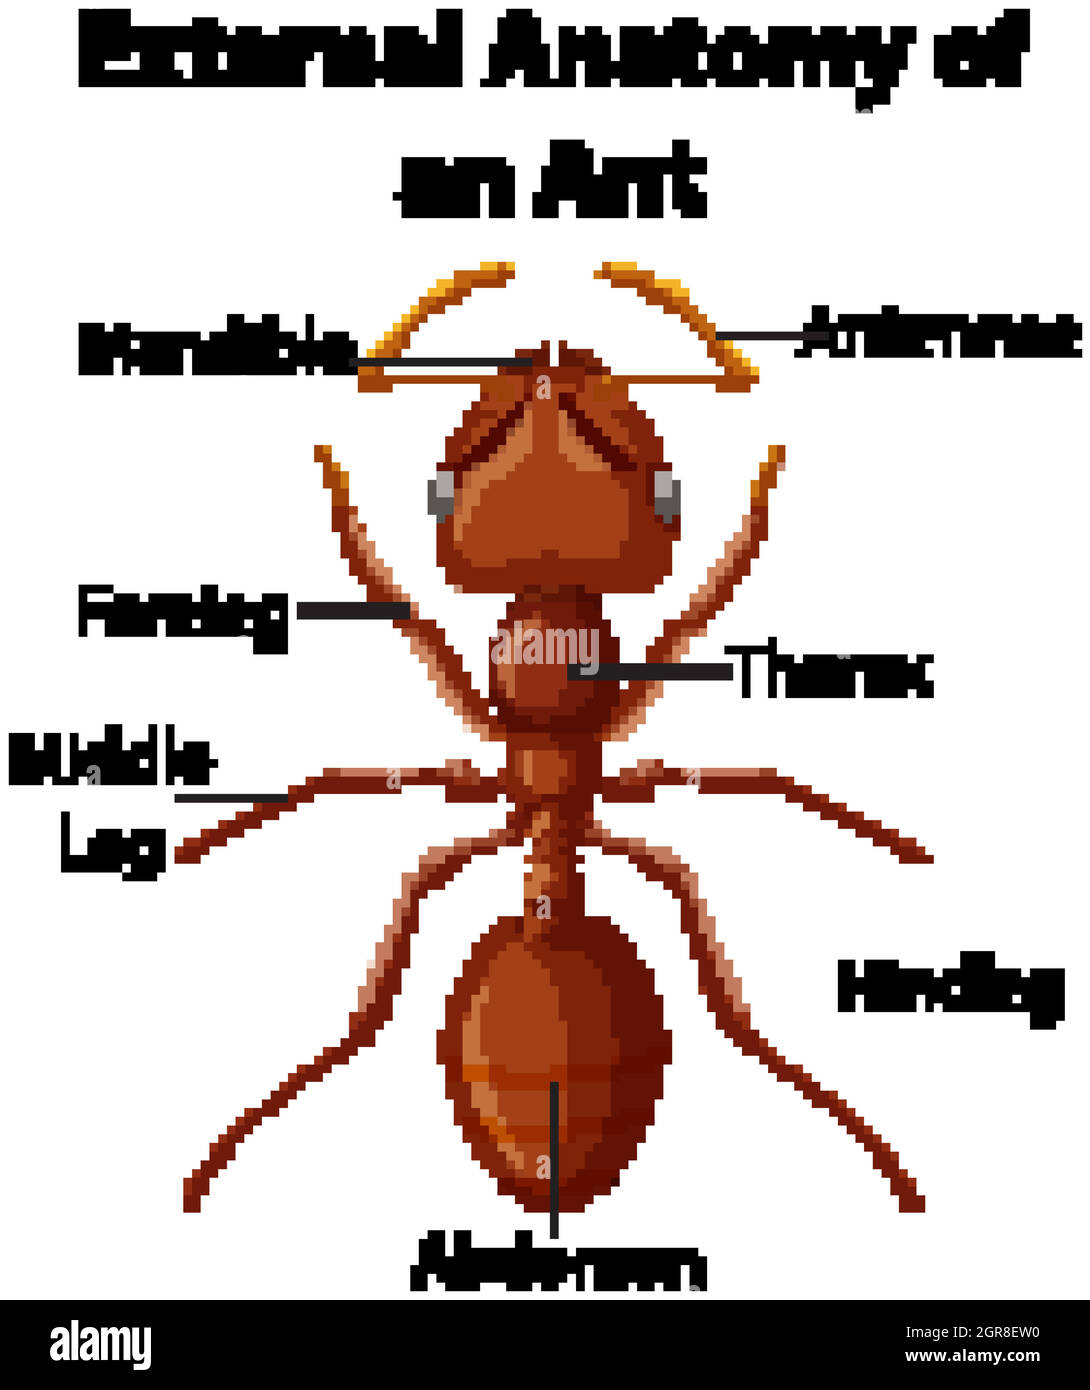 External Anatomy of an Ant on white background Stock Vector